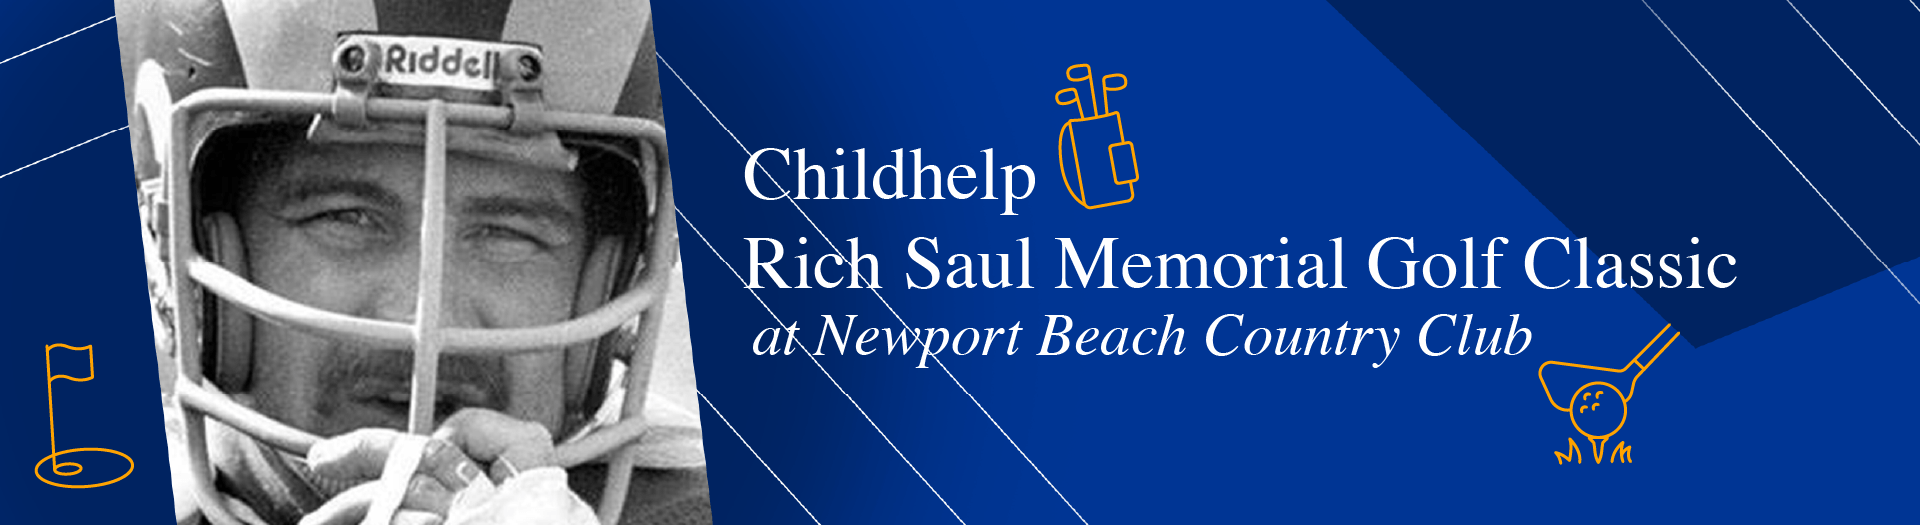 Childhelp Rich Saul Memorial Golf Classic delivers 100521